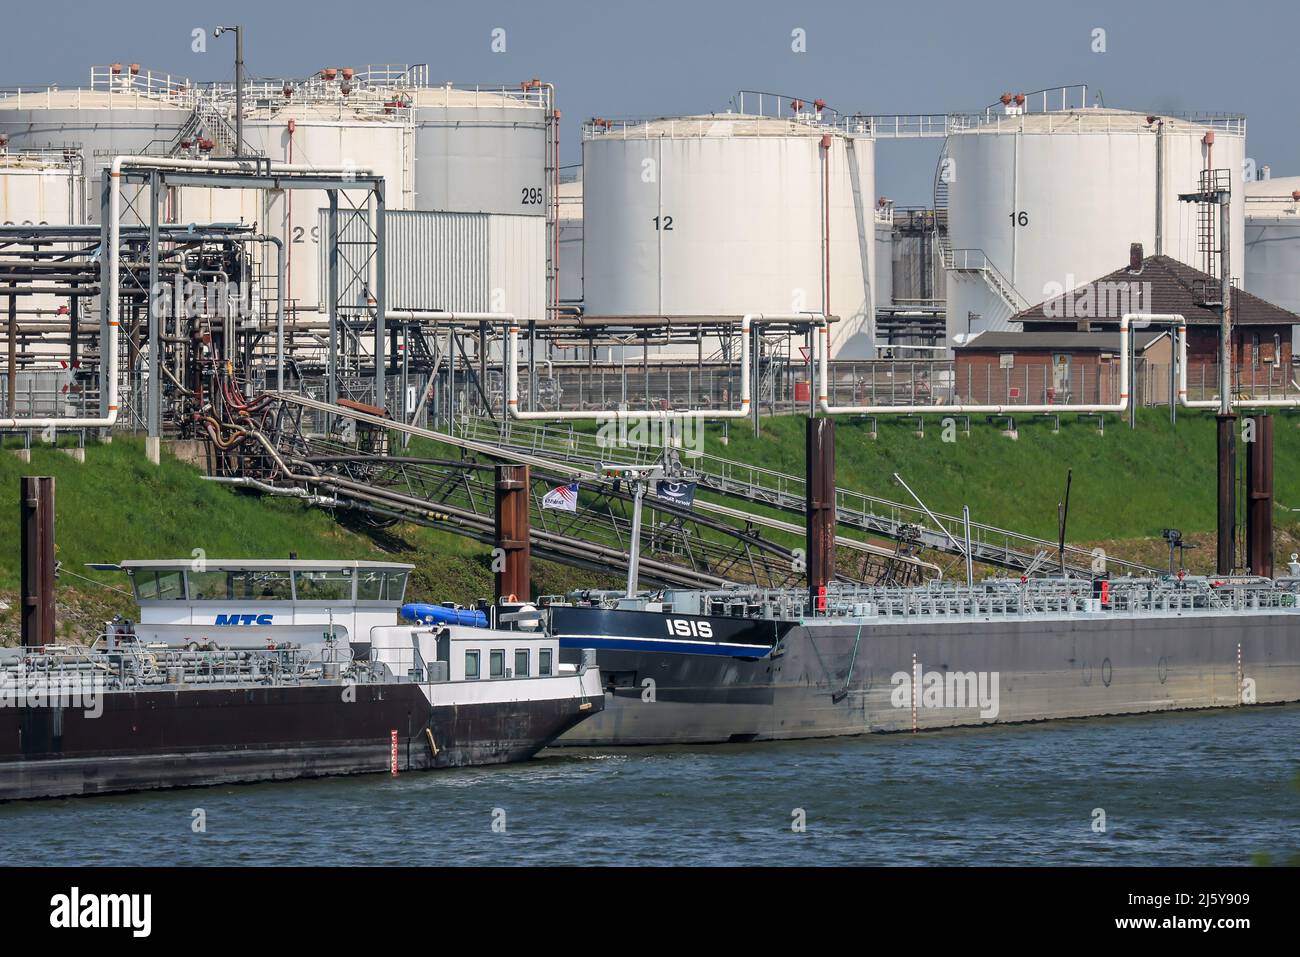 Duisburg, North Rhine-Westphalia, Germany - Duisburg Port, Duisburg Ruhrort, oil island, tankers in front of tank farm for mineral oil products, fuel Stock Photo